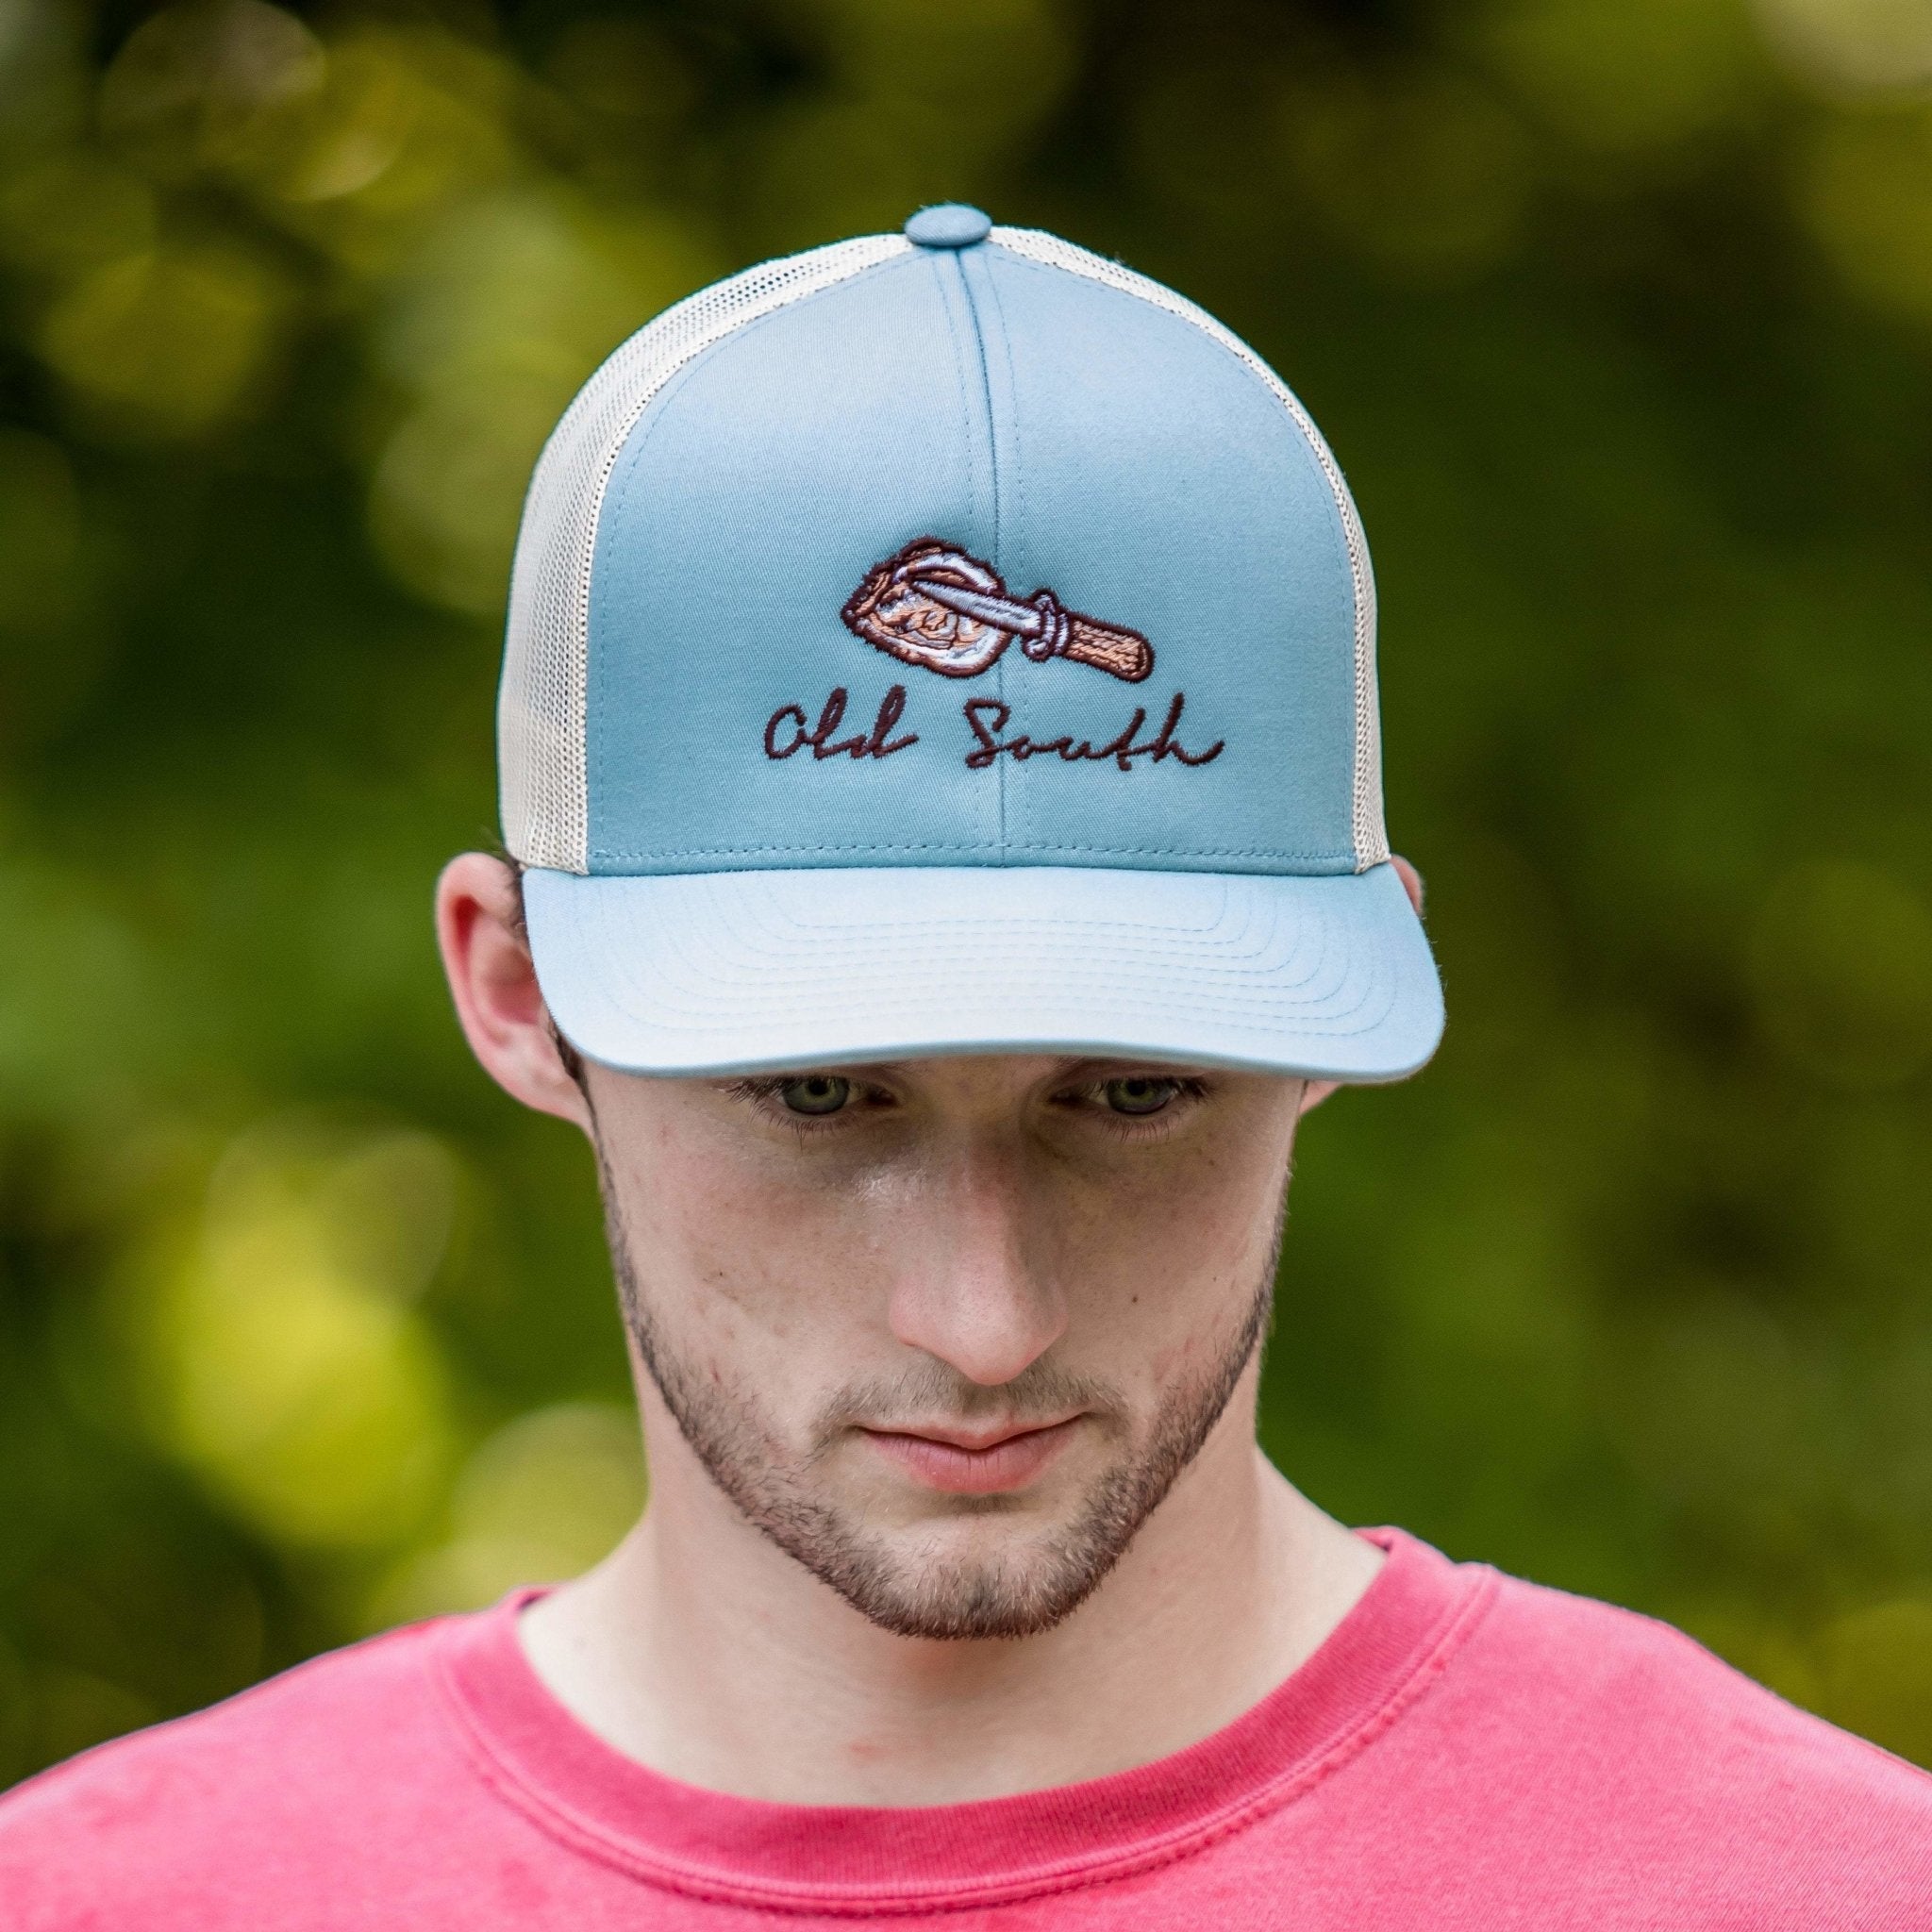 http://www.oldsouthapparel.com/cdn/shop/products/oldsouthapparel-oyster-trucker-hat-996118.jpg?v=1700112795